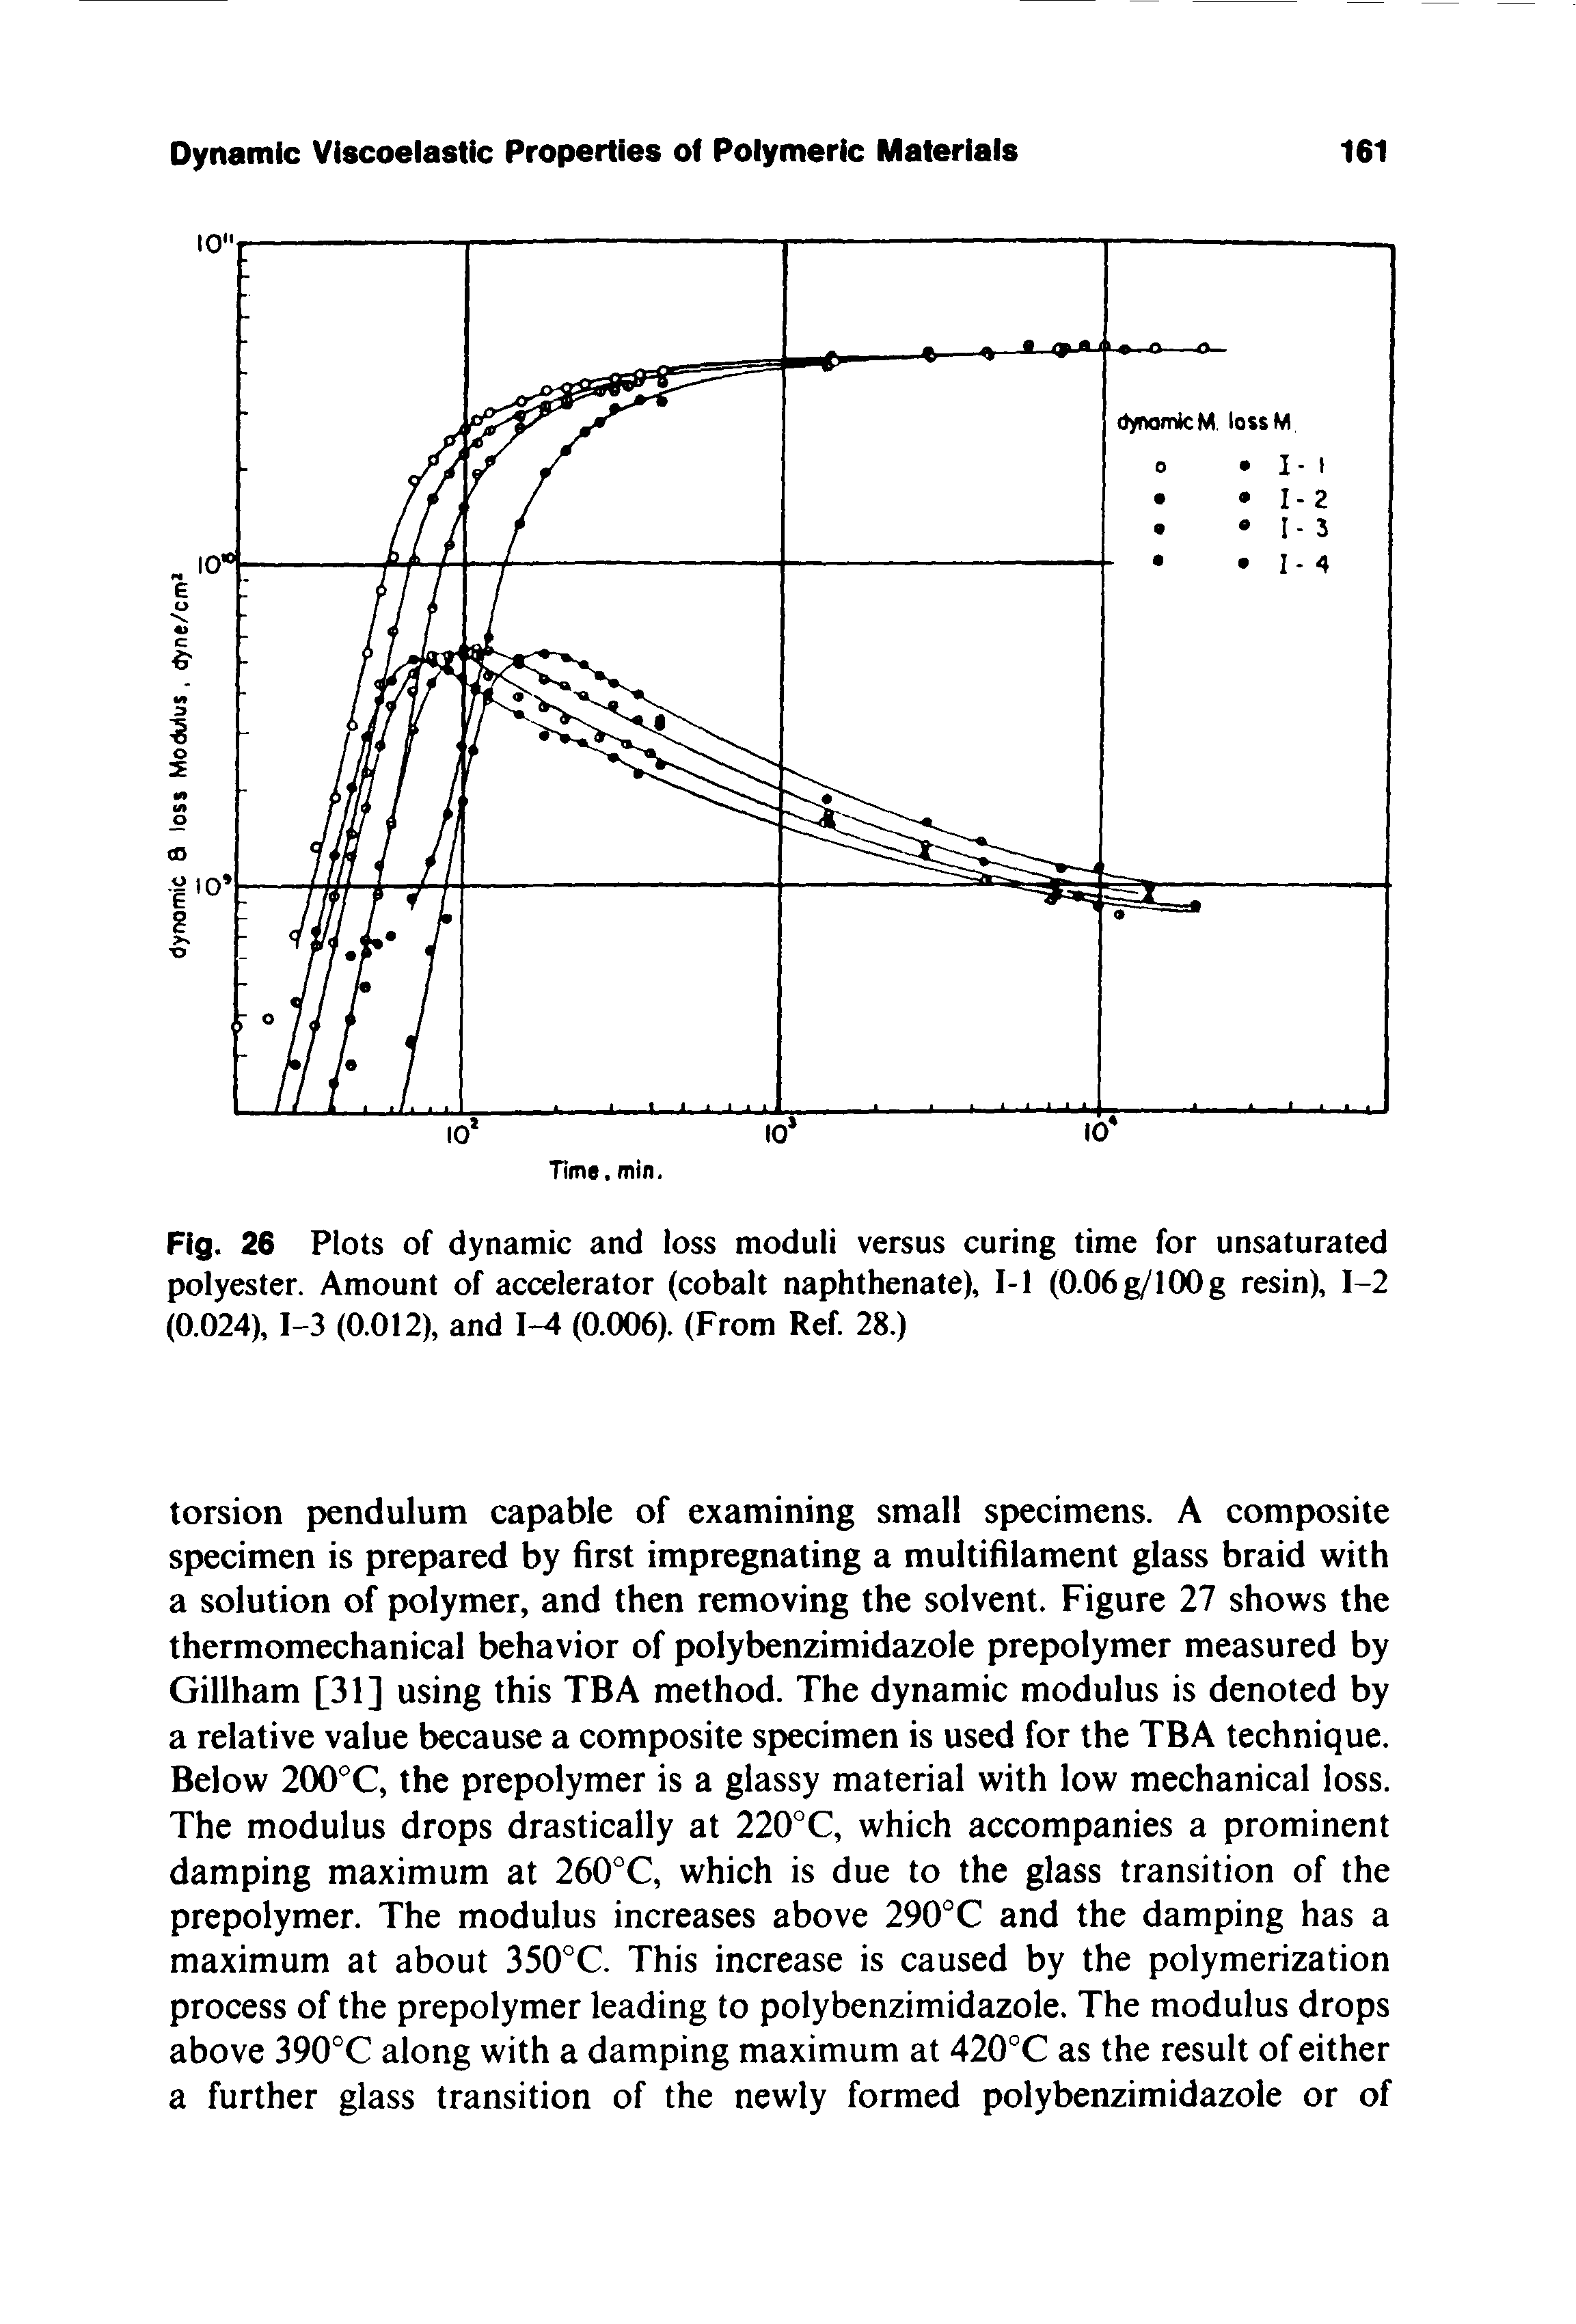 Fig. 26 Plots of dynamic and loss moduli versus curing time for unsaturated polyester. Amount of accelerator (cobalt naphthenate), I-l (0.06g/I00g resin), 1-2 (0.024), 1-3 (0.012), and 1-4 (0.006). (From Ref. 28.)...